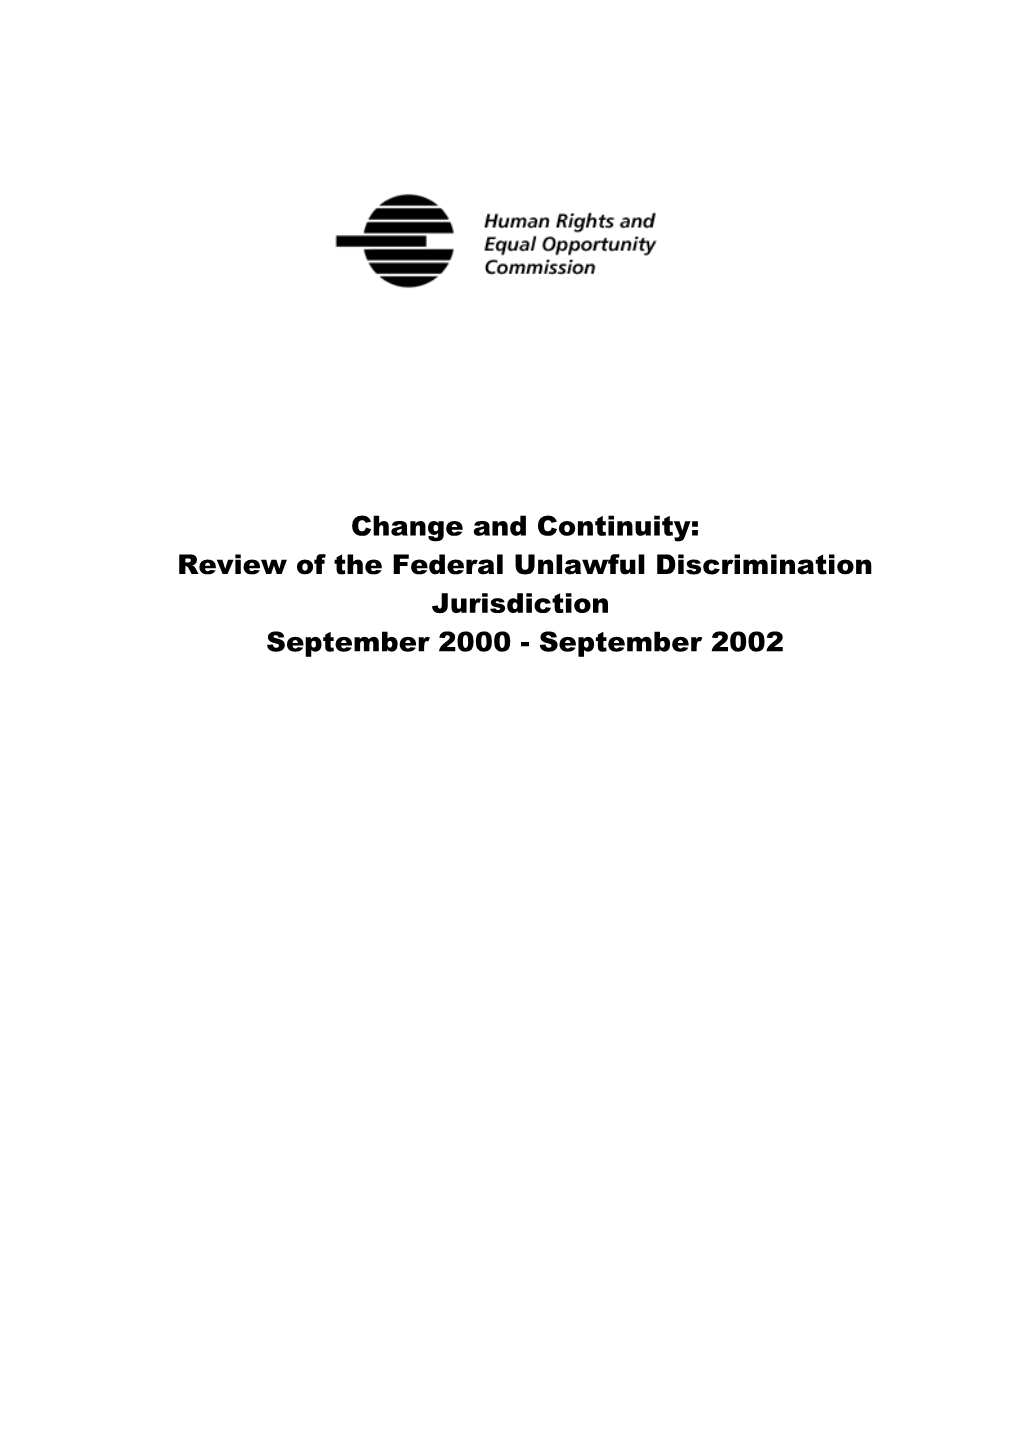 Review of the Federal Unlawful Discrimination Jurisdiction